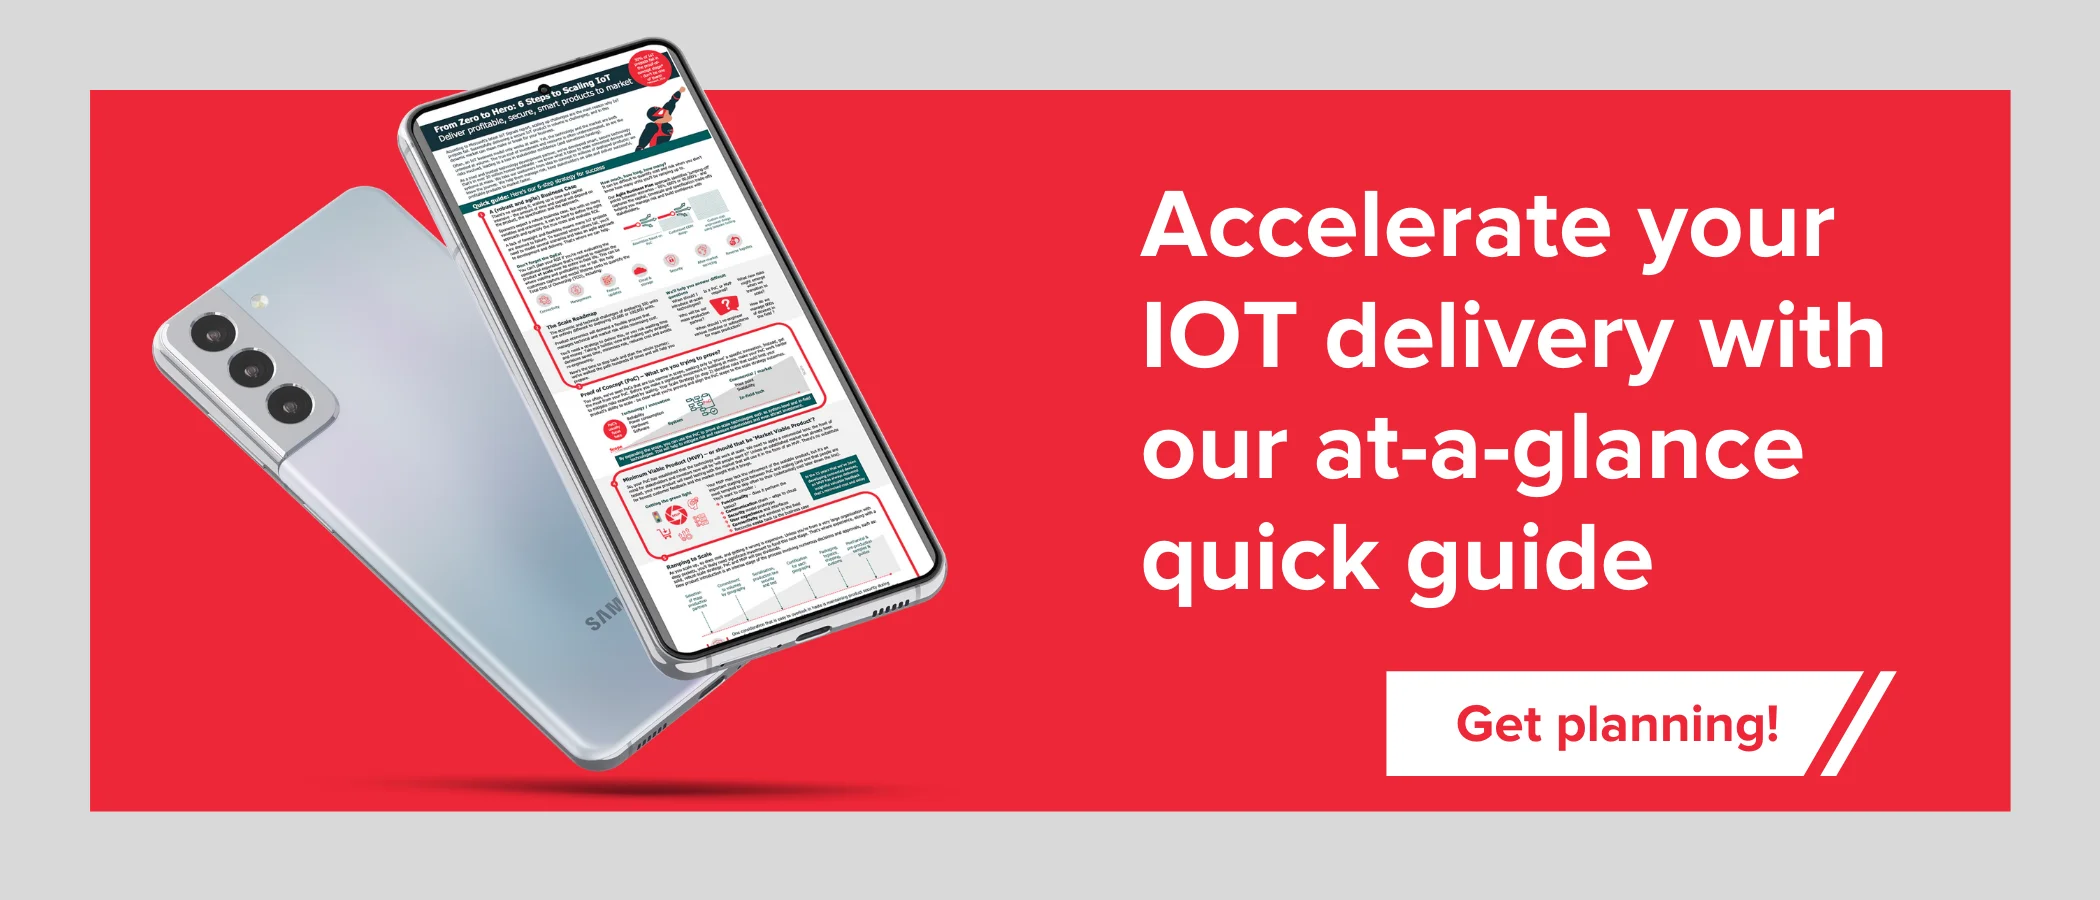 Quick Guide: Accelerate your IoT delivery with our at-a-glance quick guide